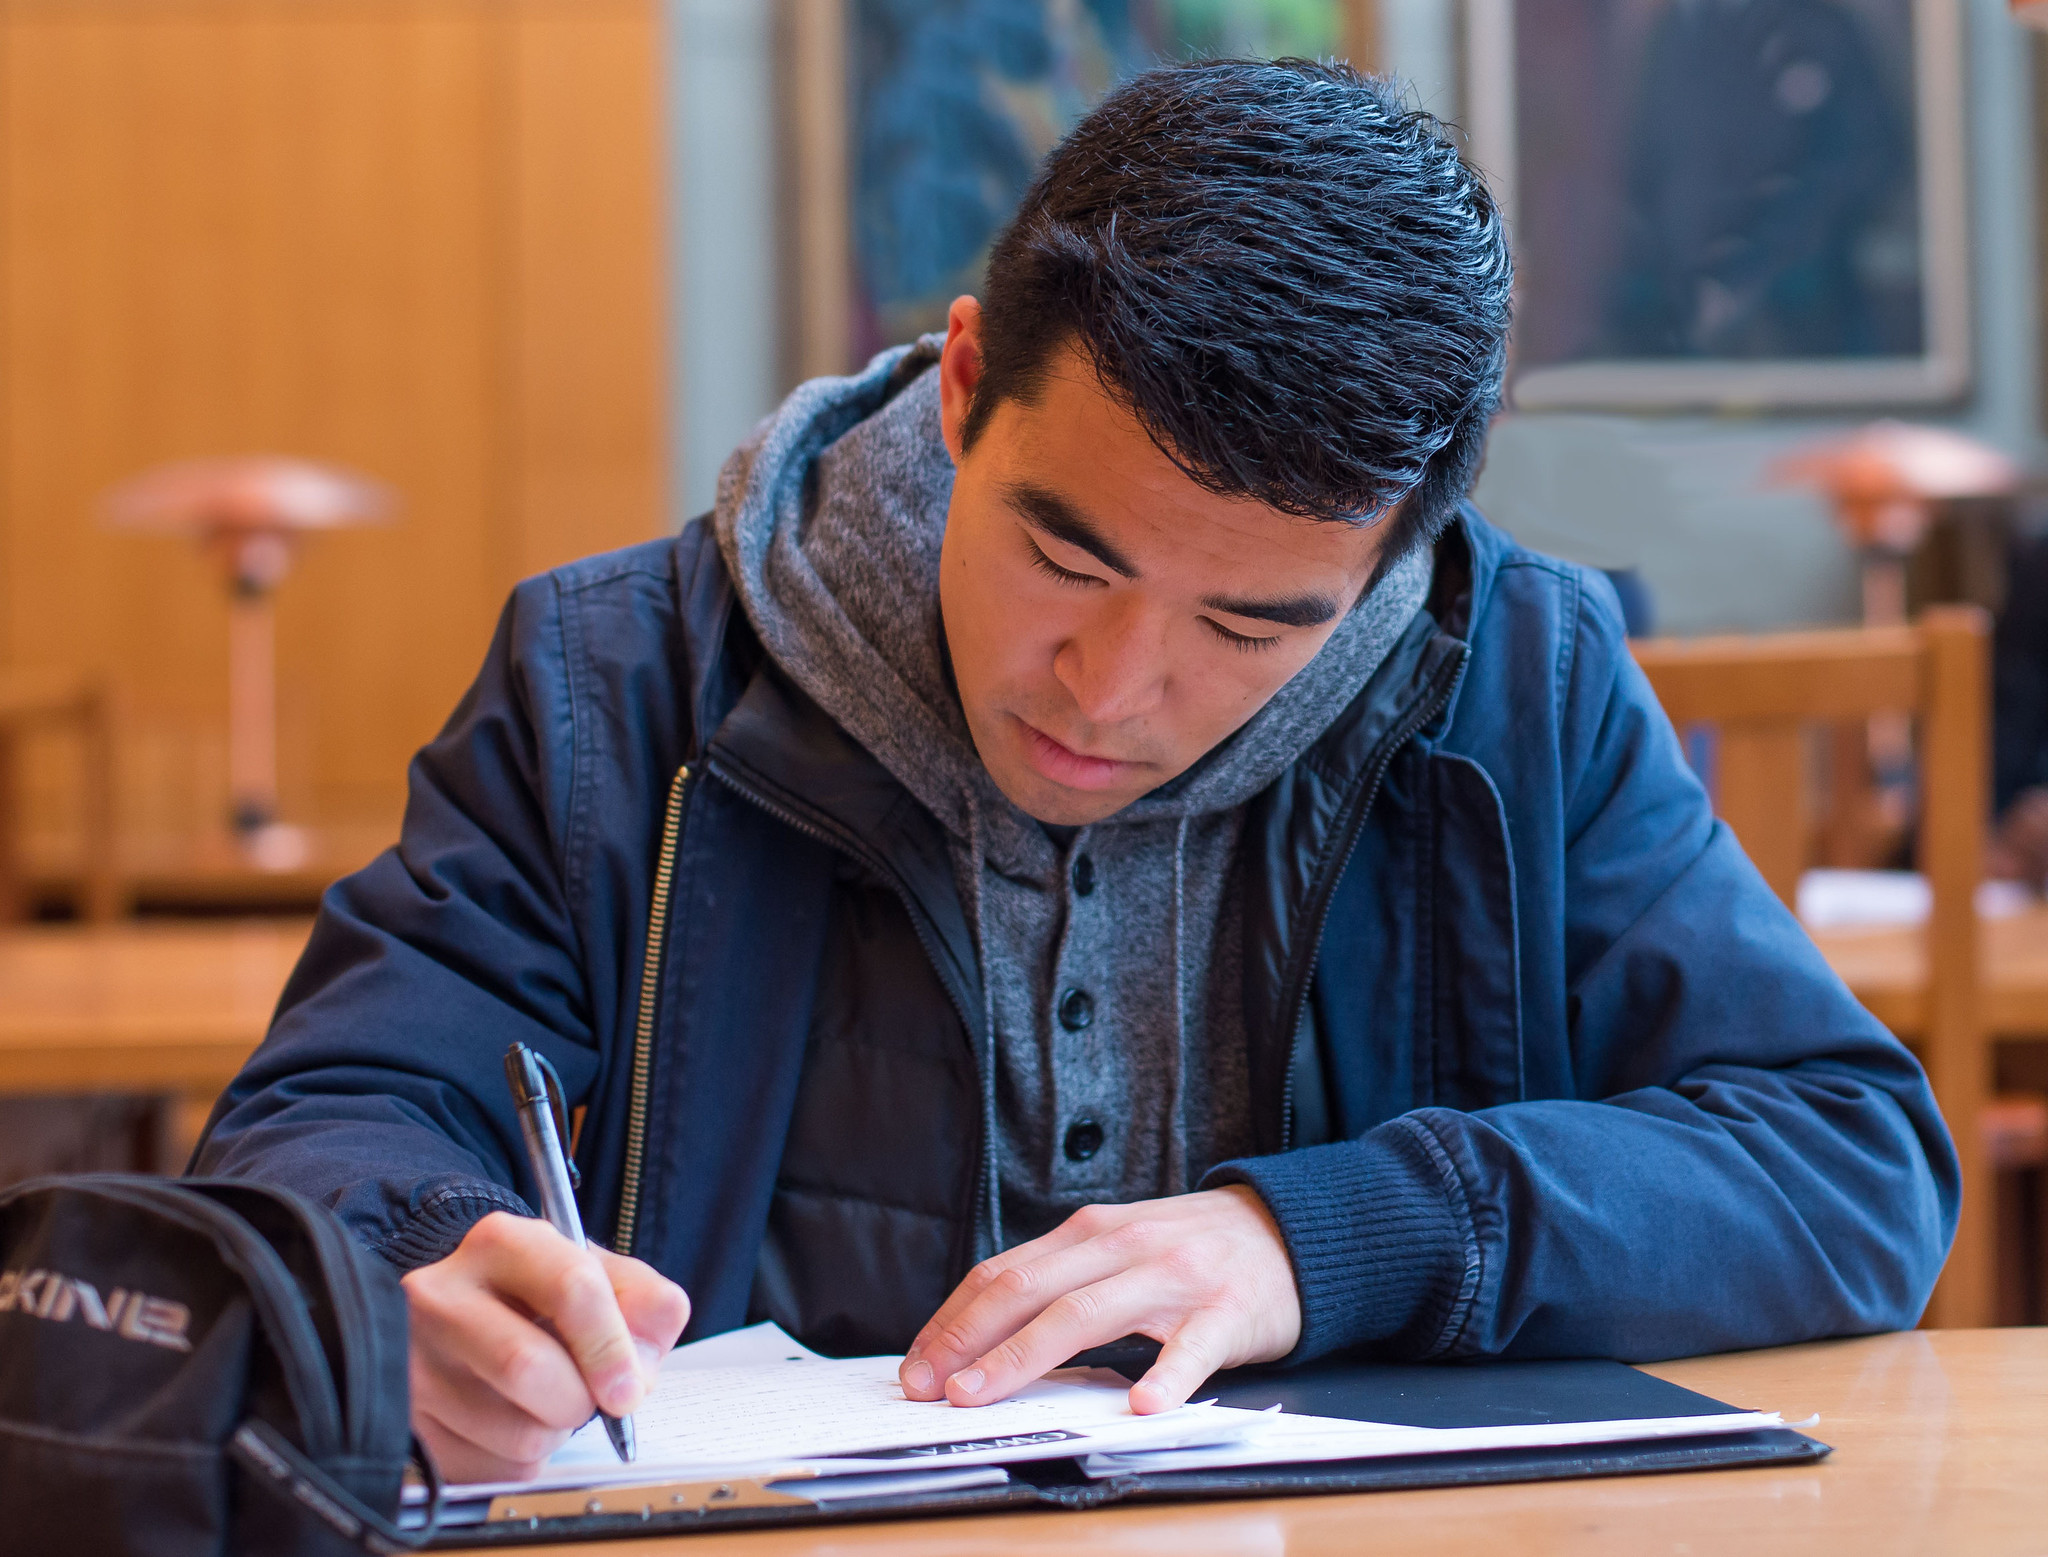 BC students: UBC’s response to Grade 12 Literacy Assessment cancellations